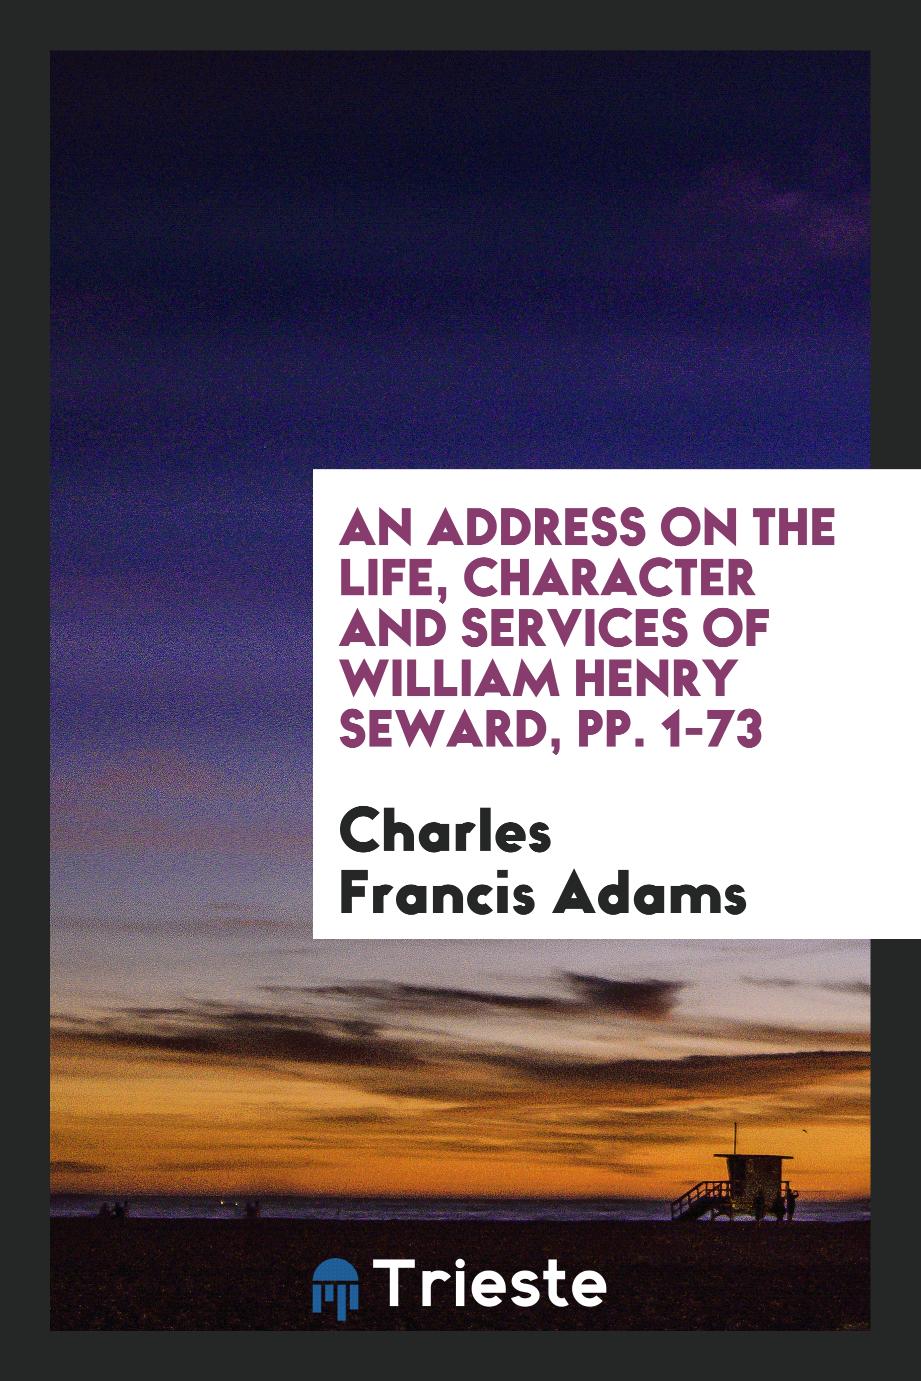 An Address on the Life, Character and Services of William Henry Seward, pp. 1-73